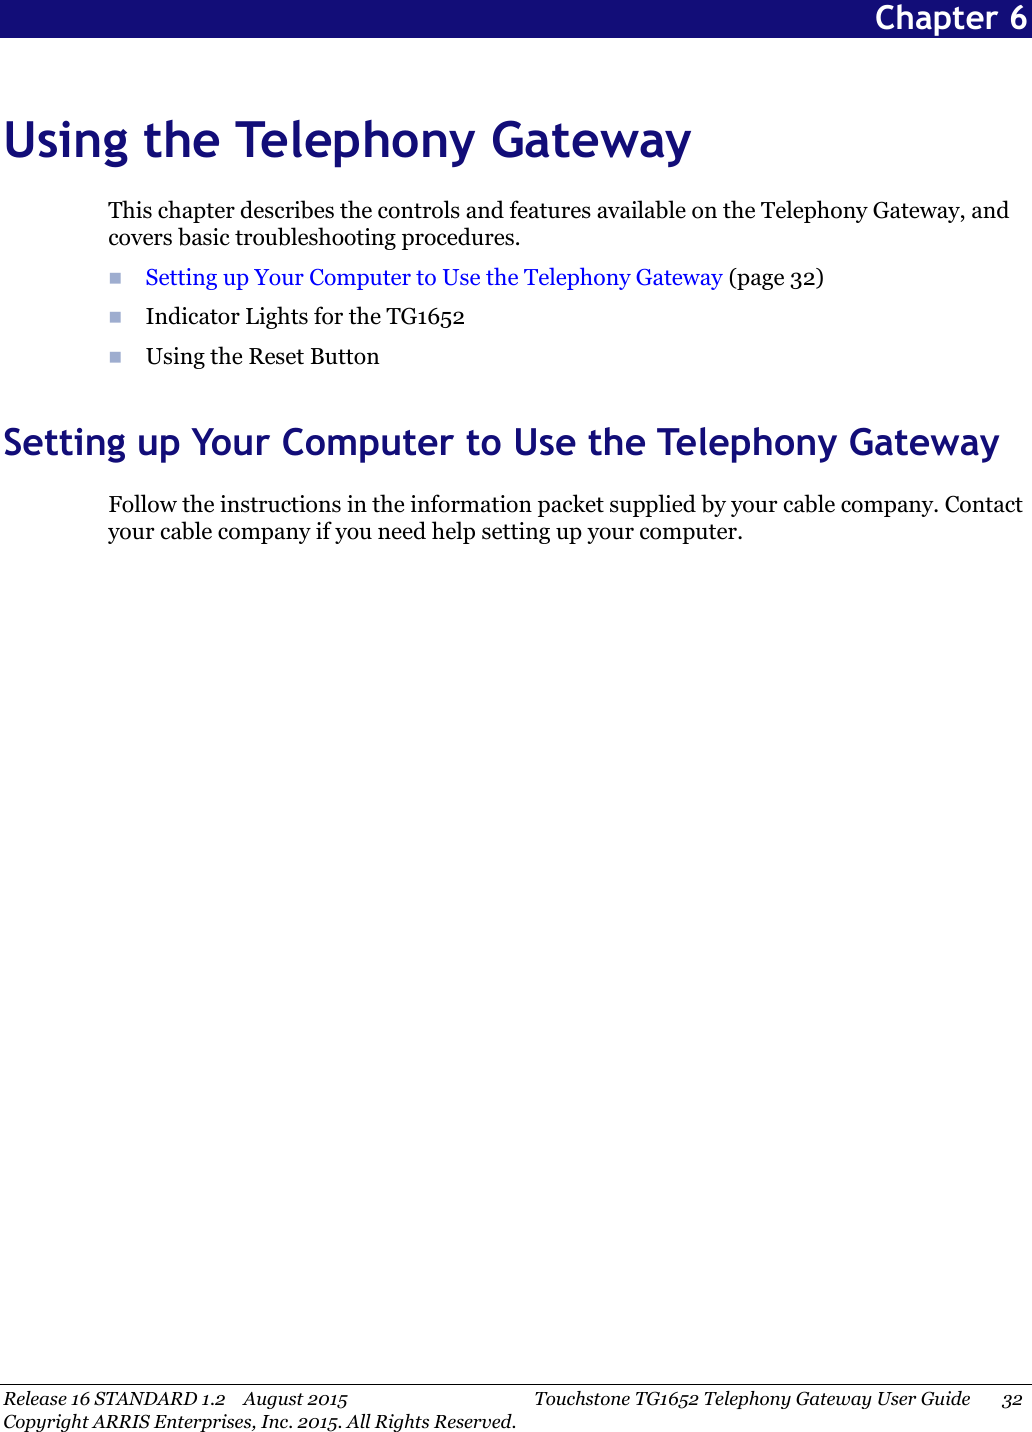 Release 16 STANDARD 1.2 August 2015 Touchstone TG1652 Telephony Gateway User Guide 32Copyright ARRIS Enterprises, Inc. 2015. All Rights Reserved.Chapter 6Using the Telephony GatewayThis chapter describes the controls and features available on the Telephony Gateway, andcovers basic troubleshooting procedures.Setting up Your Computer to Use the Telephony Gateway (page 32)Indicator Lights for the TG1652Using the Reset ButtonSetting up Your Computer to Use the Telephony GatewayFollow the instructions in the information packet supplied by your cable company. Contactyour cable company if you need help setting up your computer.